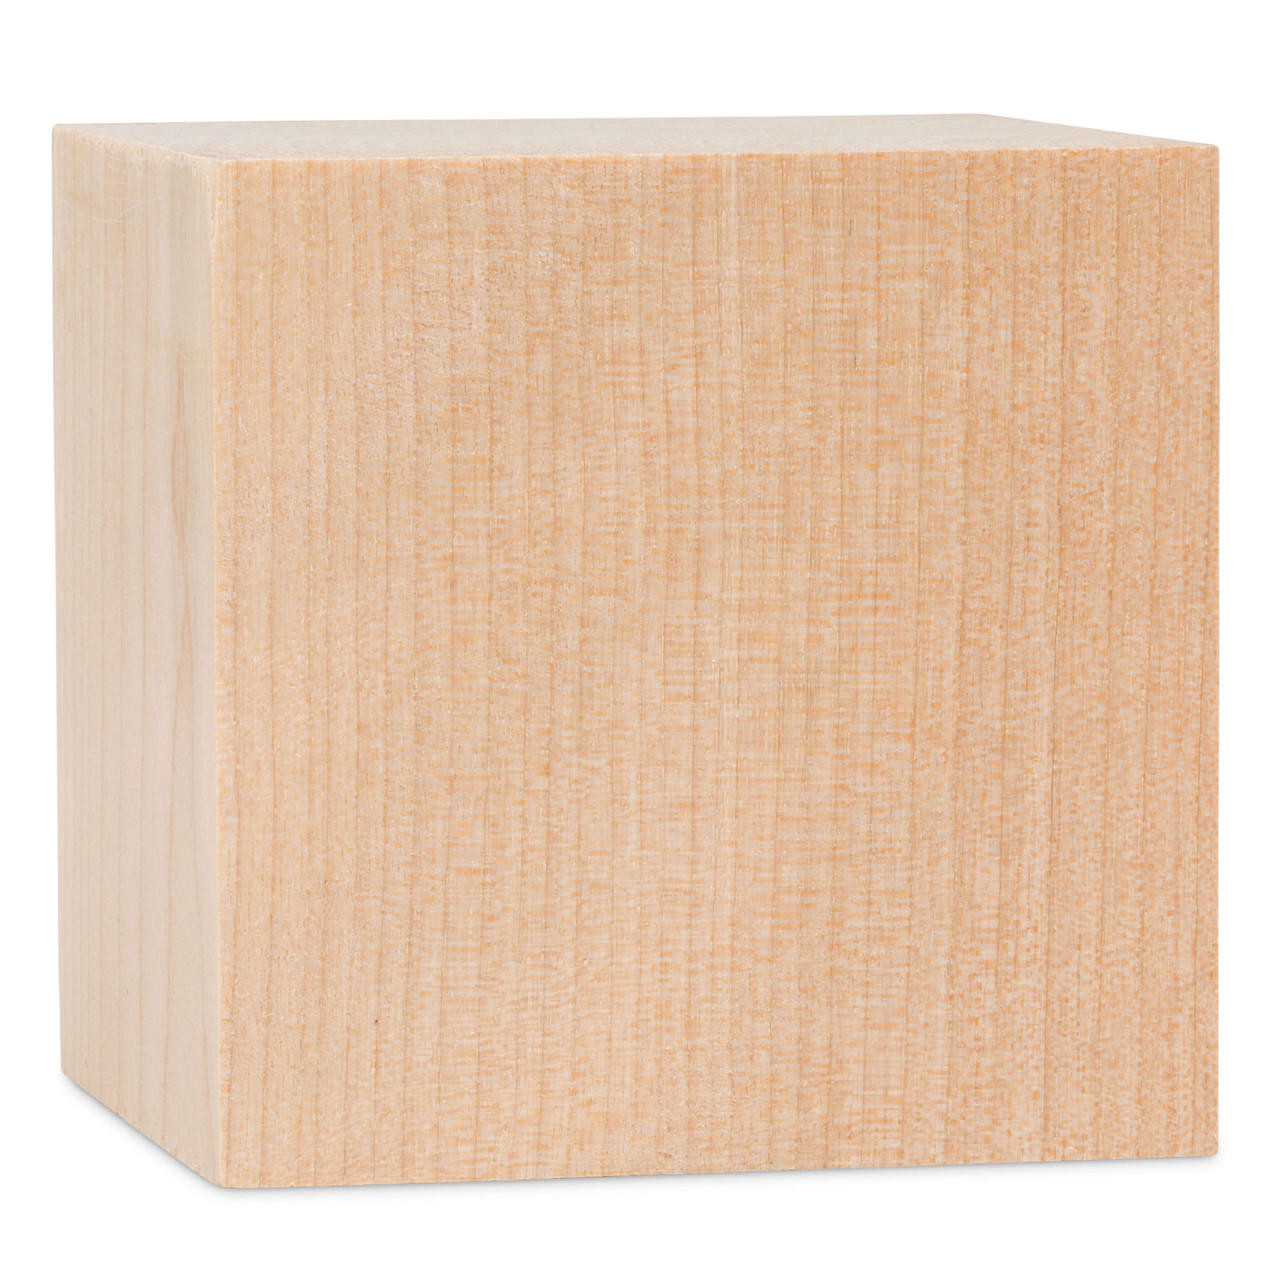 5 Large Wood Cubes, Pack of 2 Square Wood Block for DIY, Wooden Blocks for  Crafts and Decor, by Woodpeckers